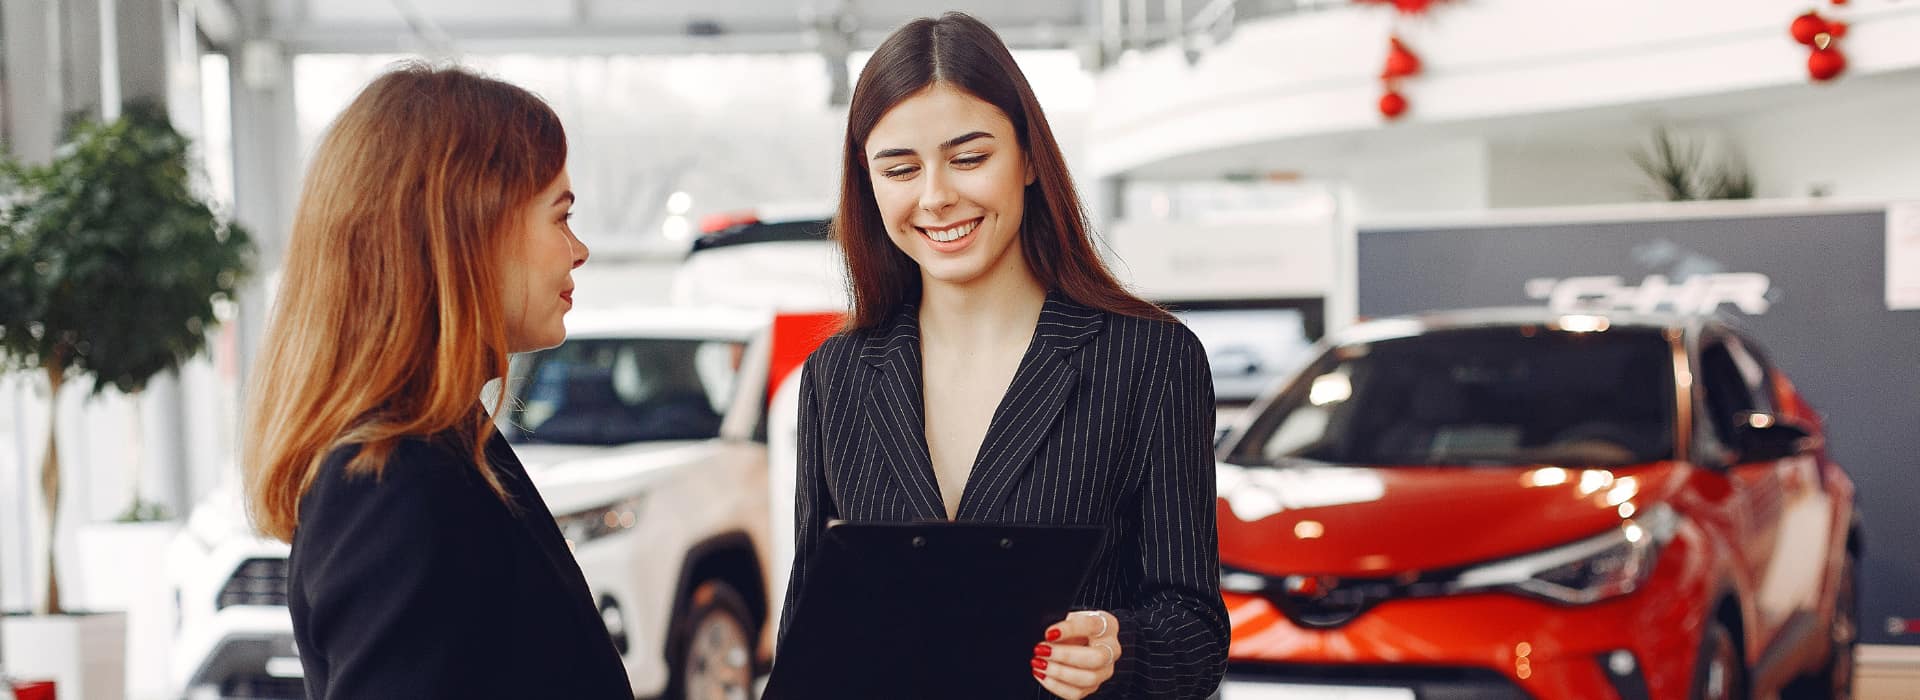 Saleswoman at dealership with happy client